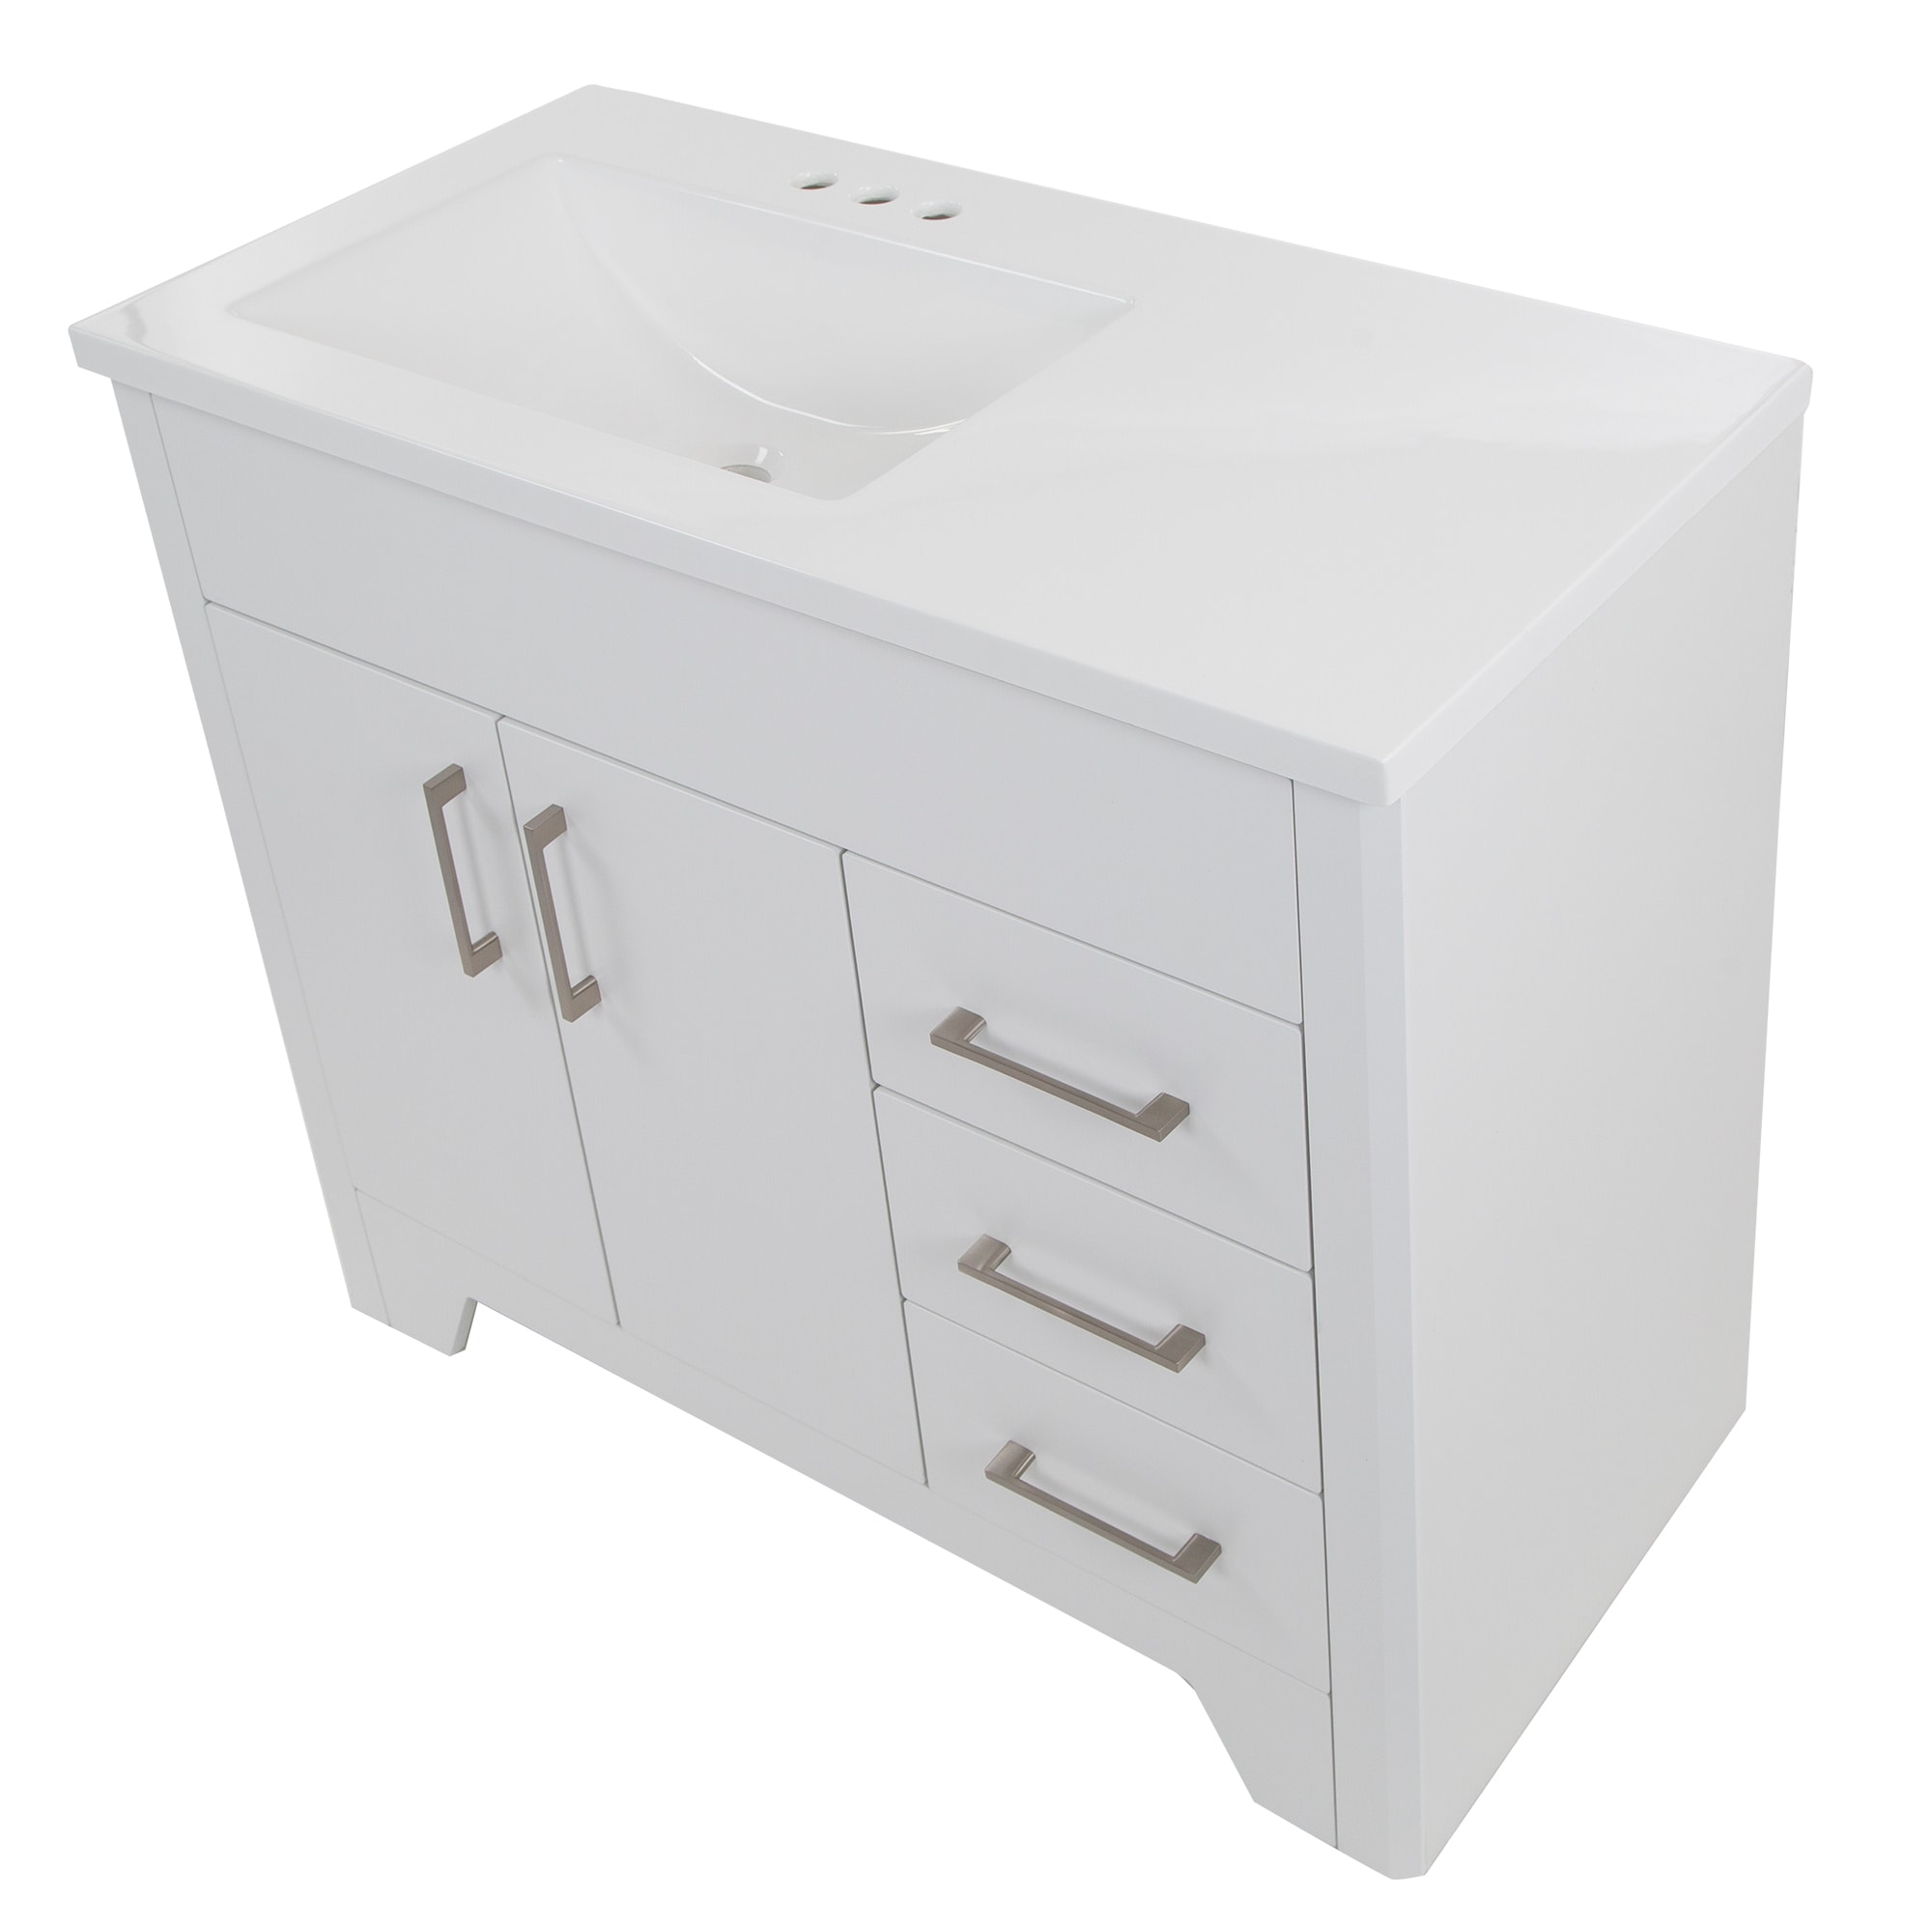 Diamond Now Shelby 36 In White Single Sink Bathroom Vanity With White Cultured Marble Top In The 